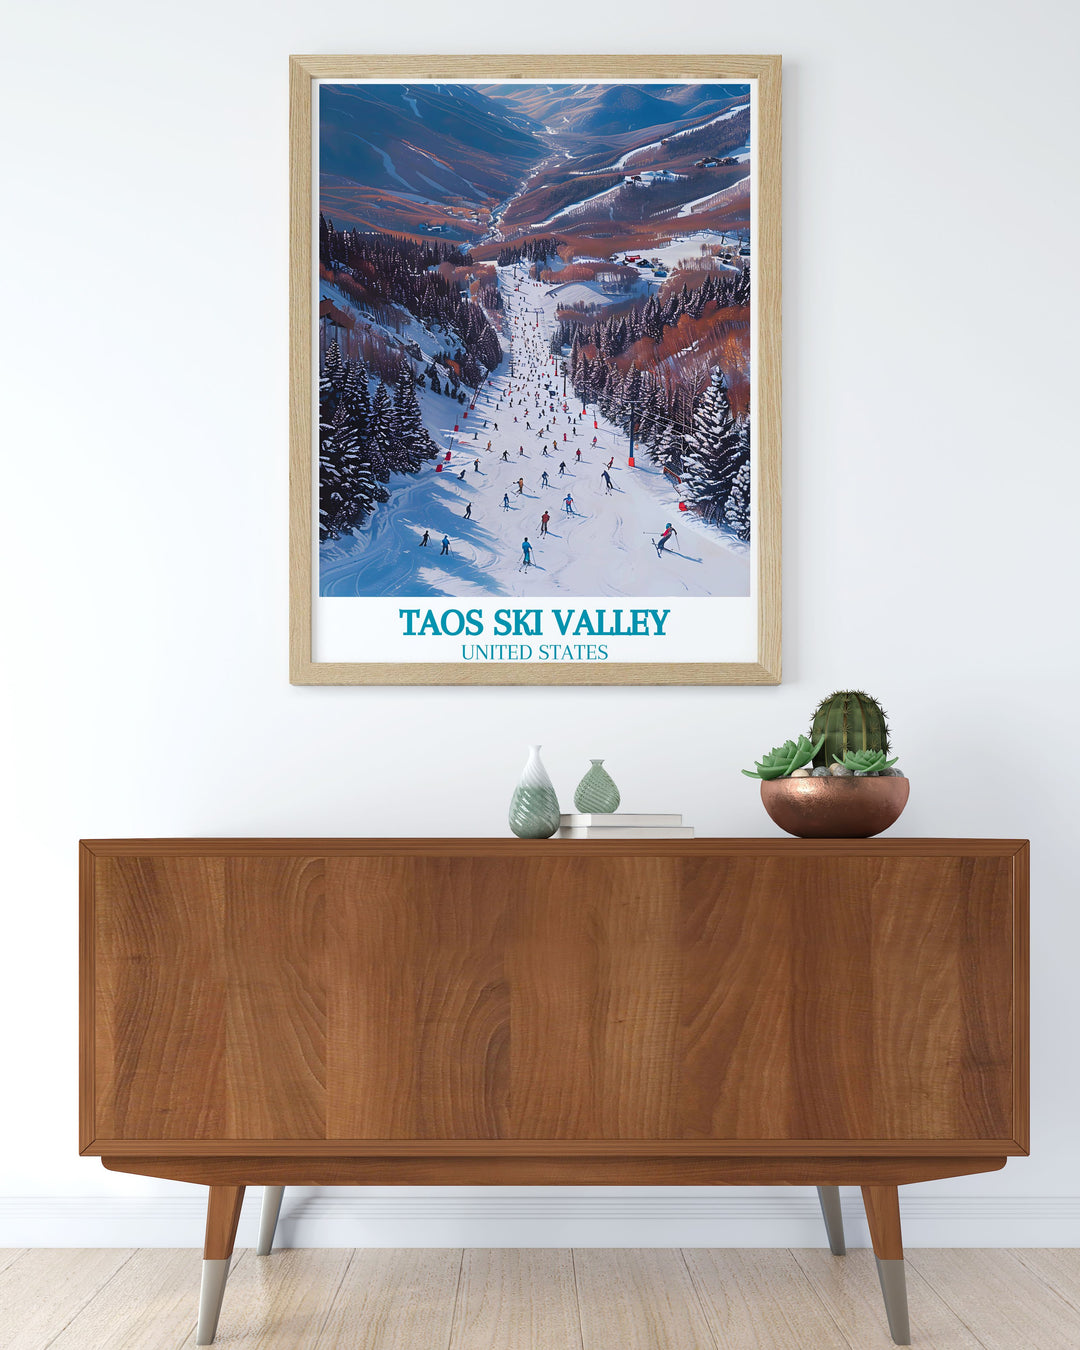 Discover the picturesque landscape of Taos Ski Valley with this exquisite travel poster, illustrating the pristine snow and dramatic peaks.